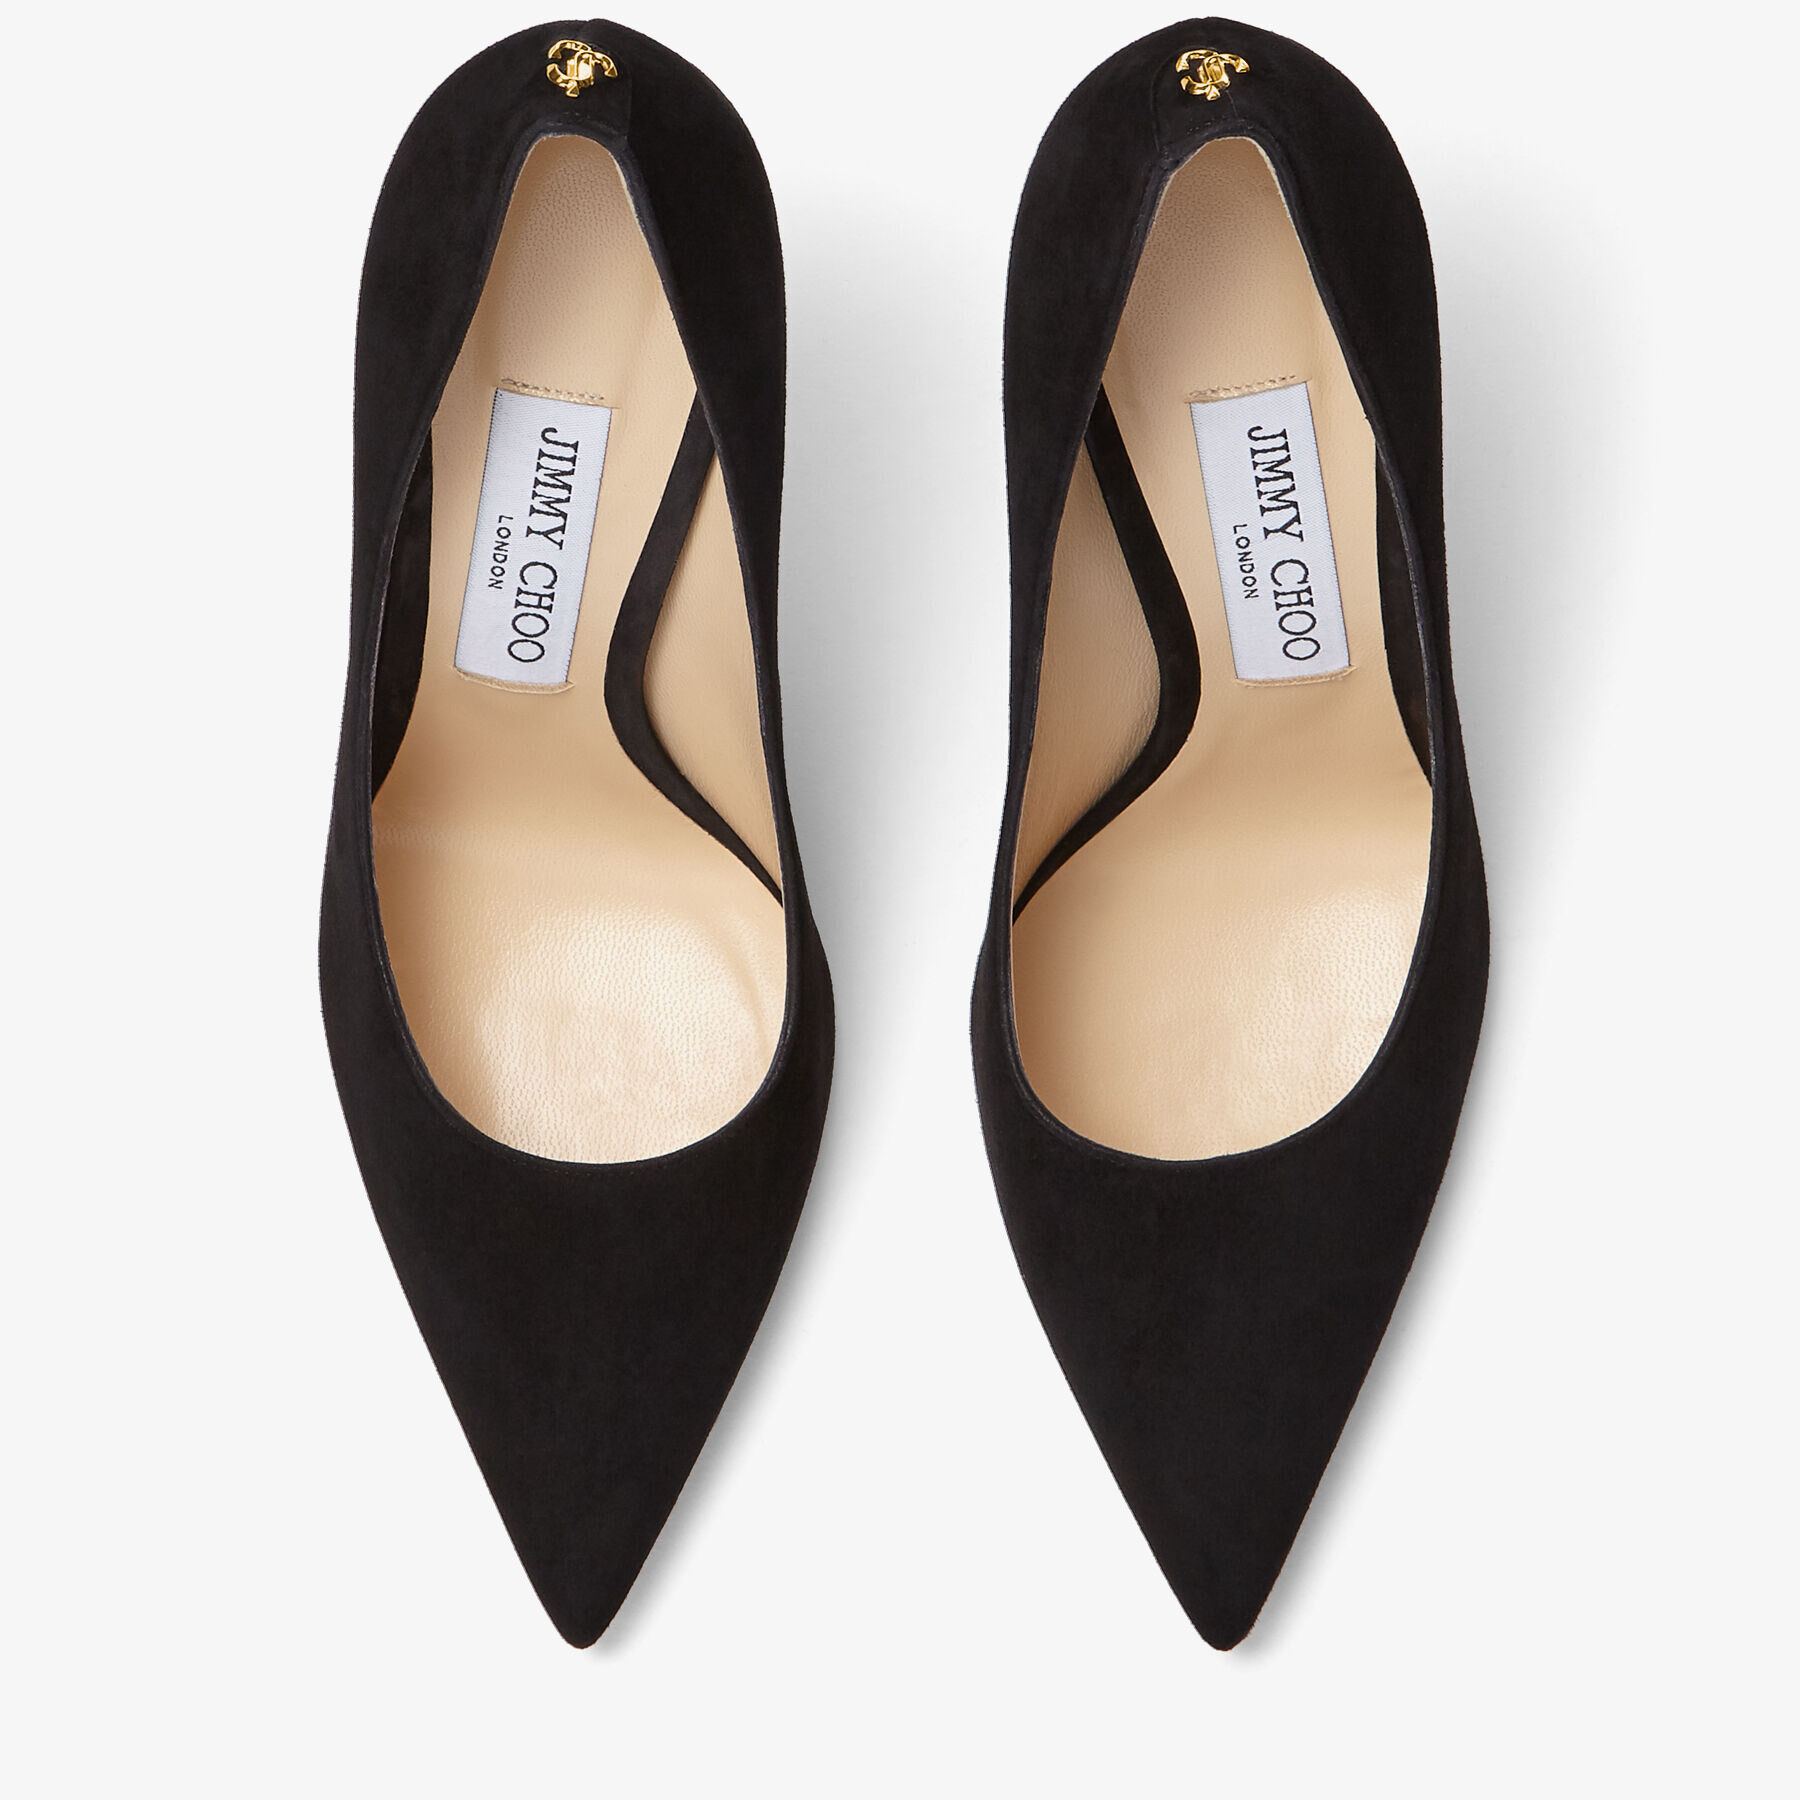 Black Suede Pointy Toe pumps with Jimmy Choo Button|LOVE 100 